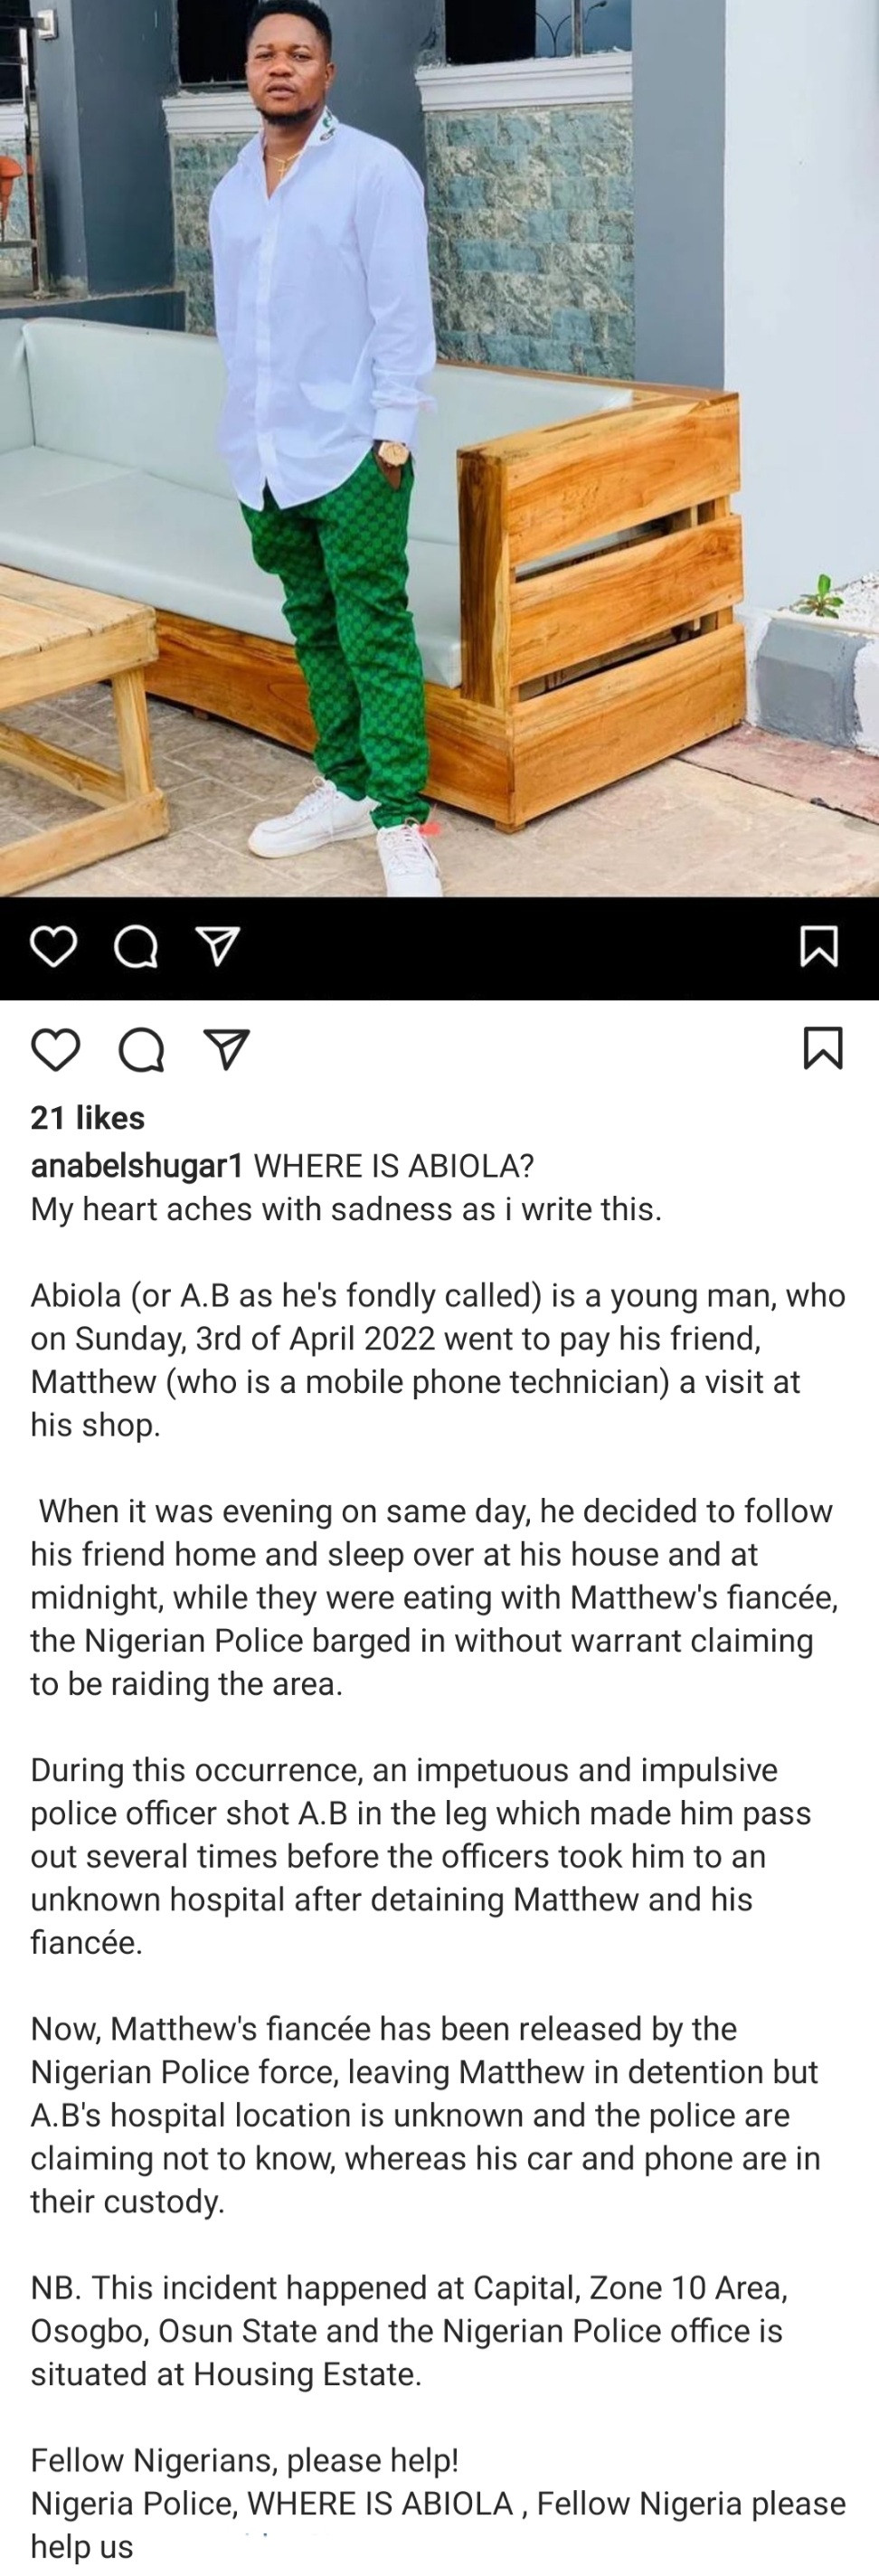 justice for abiola